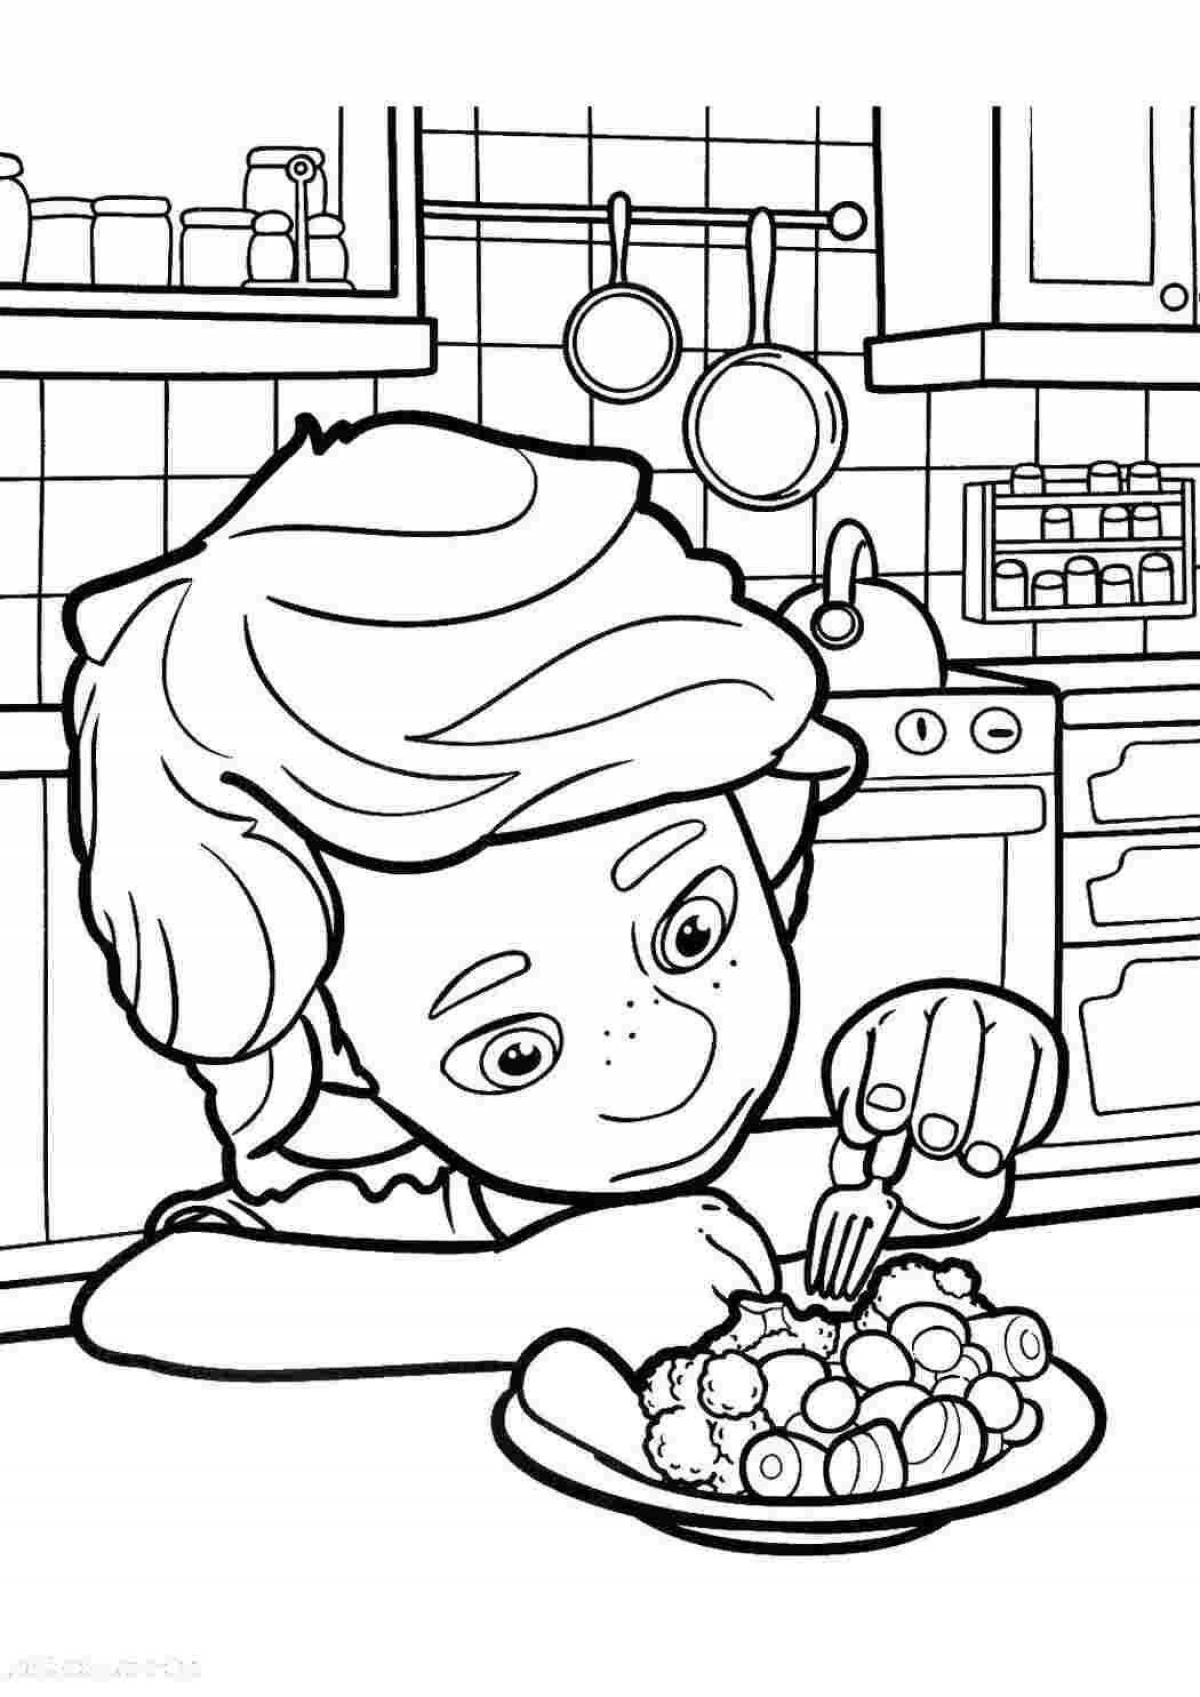 Impressive Mayan cuisine coloring page